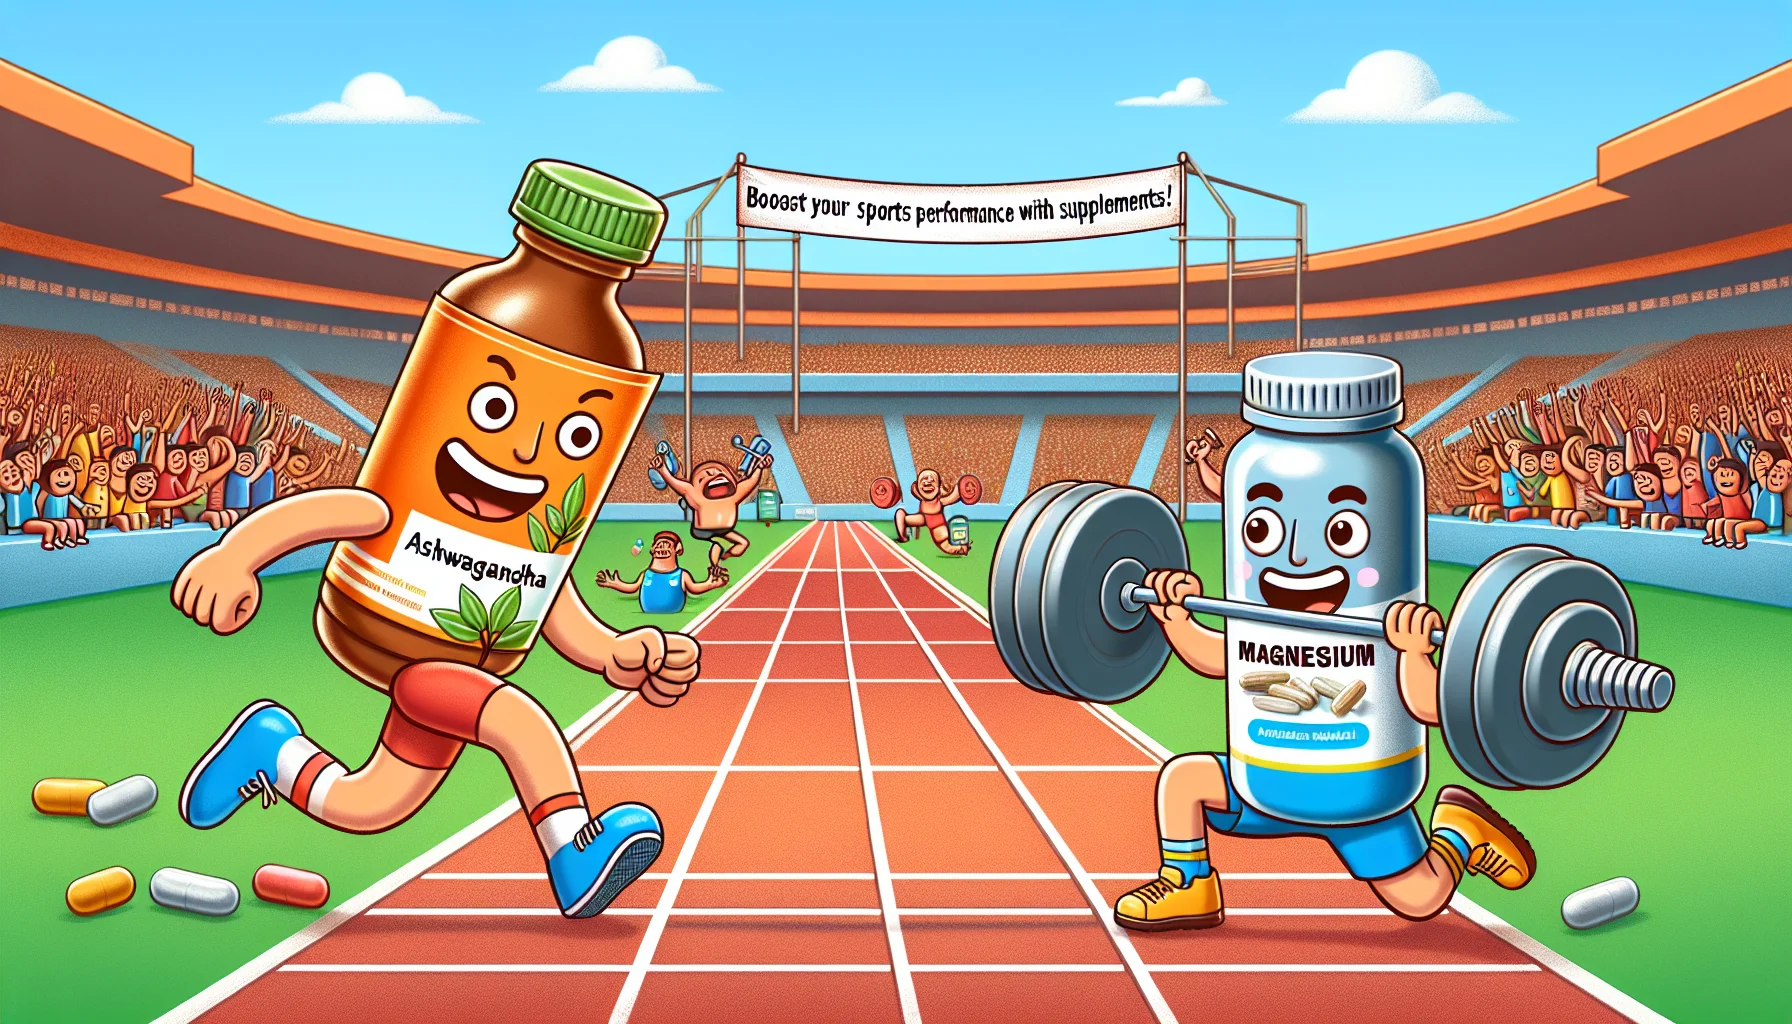 Create a humorous scene showcasing a friendly competition between two characters - a bottle of Ashwagandha and a bottle of Magnesium. They are in an athletics track, with spectators cheering them on. Make the Ashwagandha bottle as a sprinter, ready to dash off the starting line, and the Magnesium bottle as a weightlifter, lifting an impressive dumbbell. Include a banner in the background that says 'Boost Your Sports Performance with Supplements!' The style should be upbeat, lively and colorful, capturing the exciting sporty atmosphere.